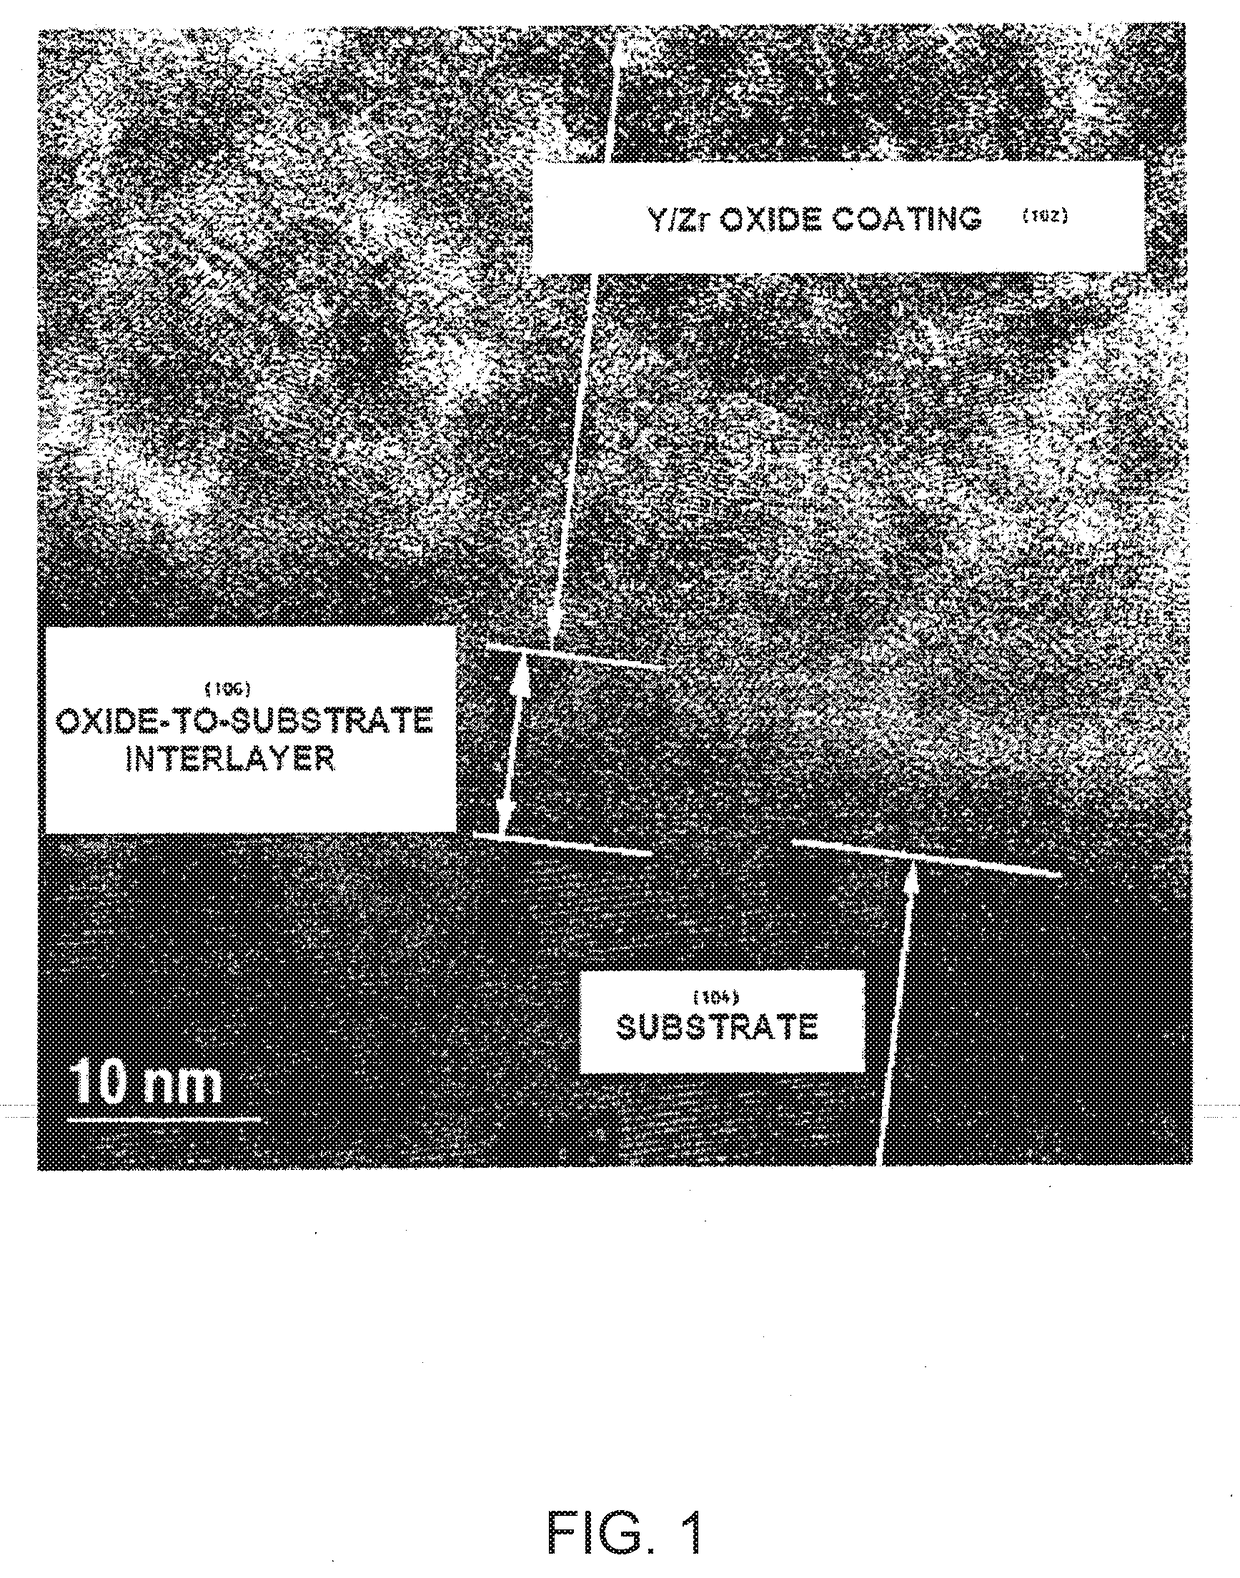 Solid Oxide Fuel Cells, Electrolyzers, and Sensors, and Methods of Making and Using the Same